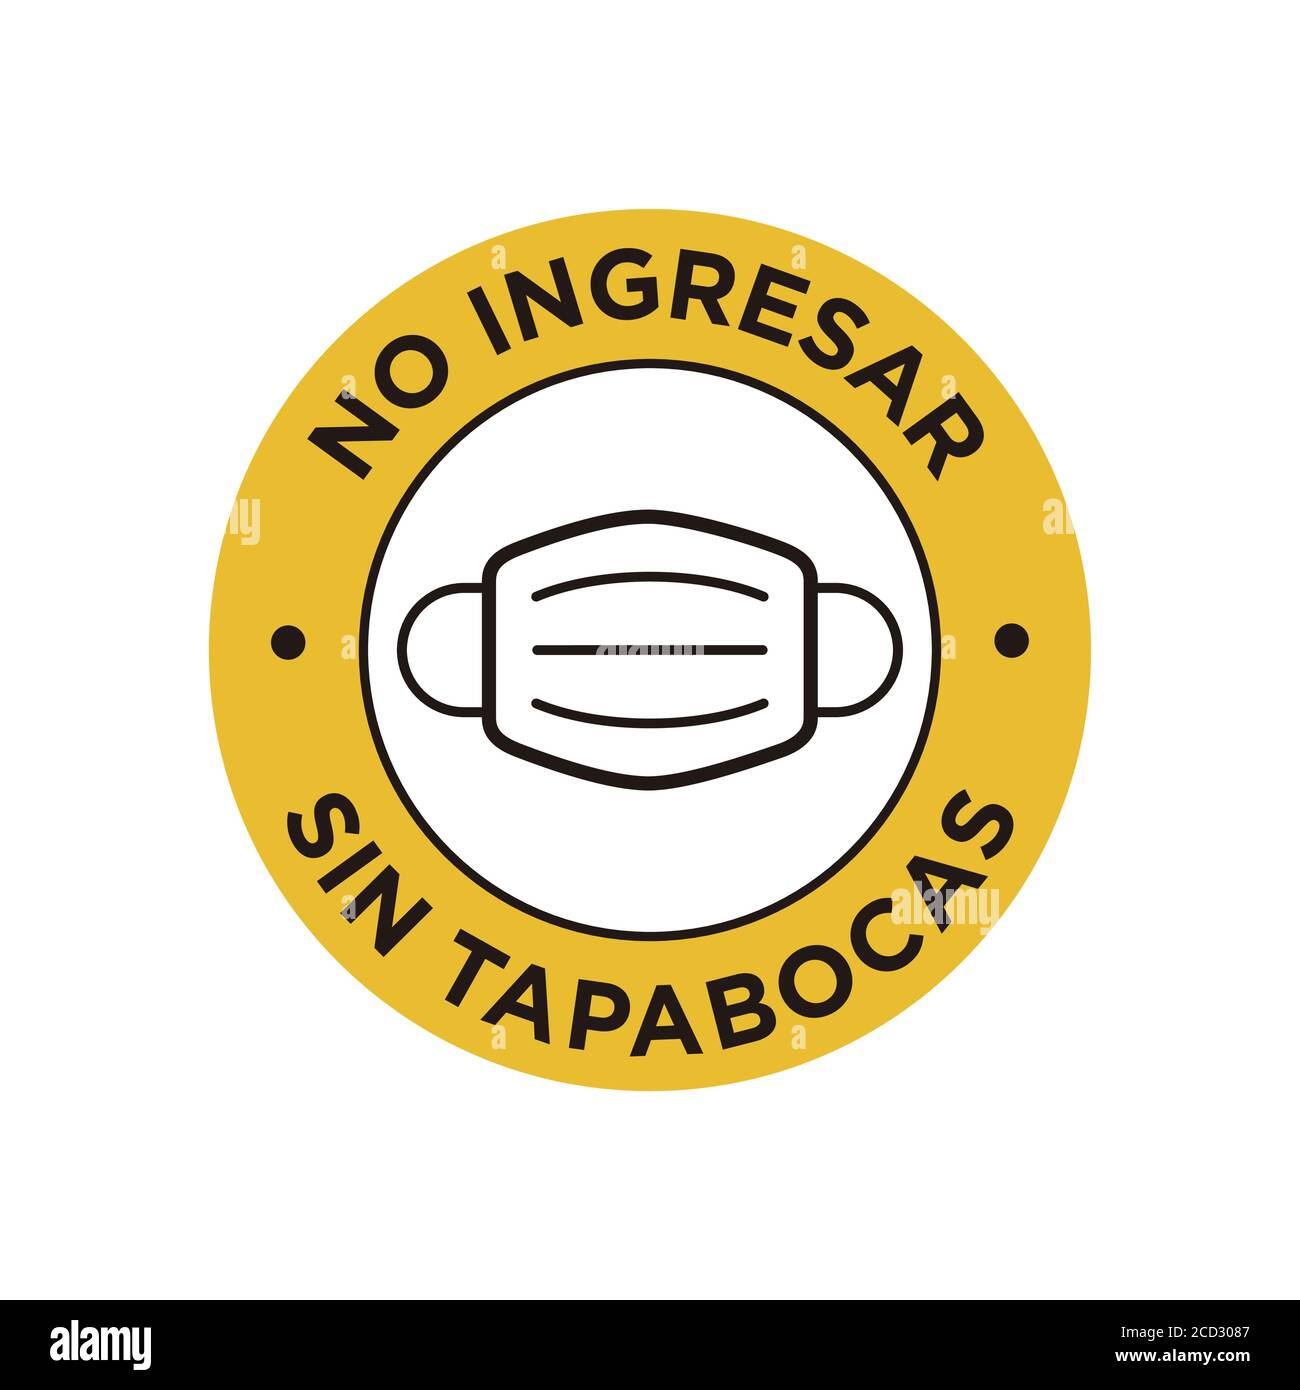 No entry  without face mask written in Spanish icon. Round and yellow symbol about mandatory use of face mask to prevent Coronavirus. Stock Vector